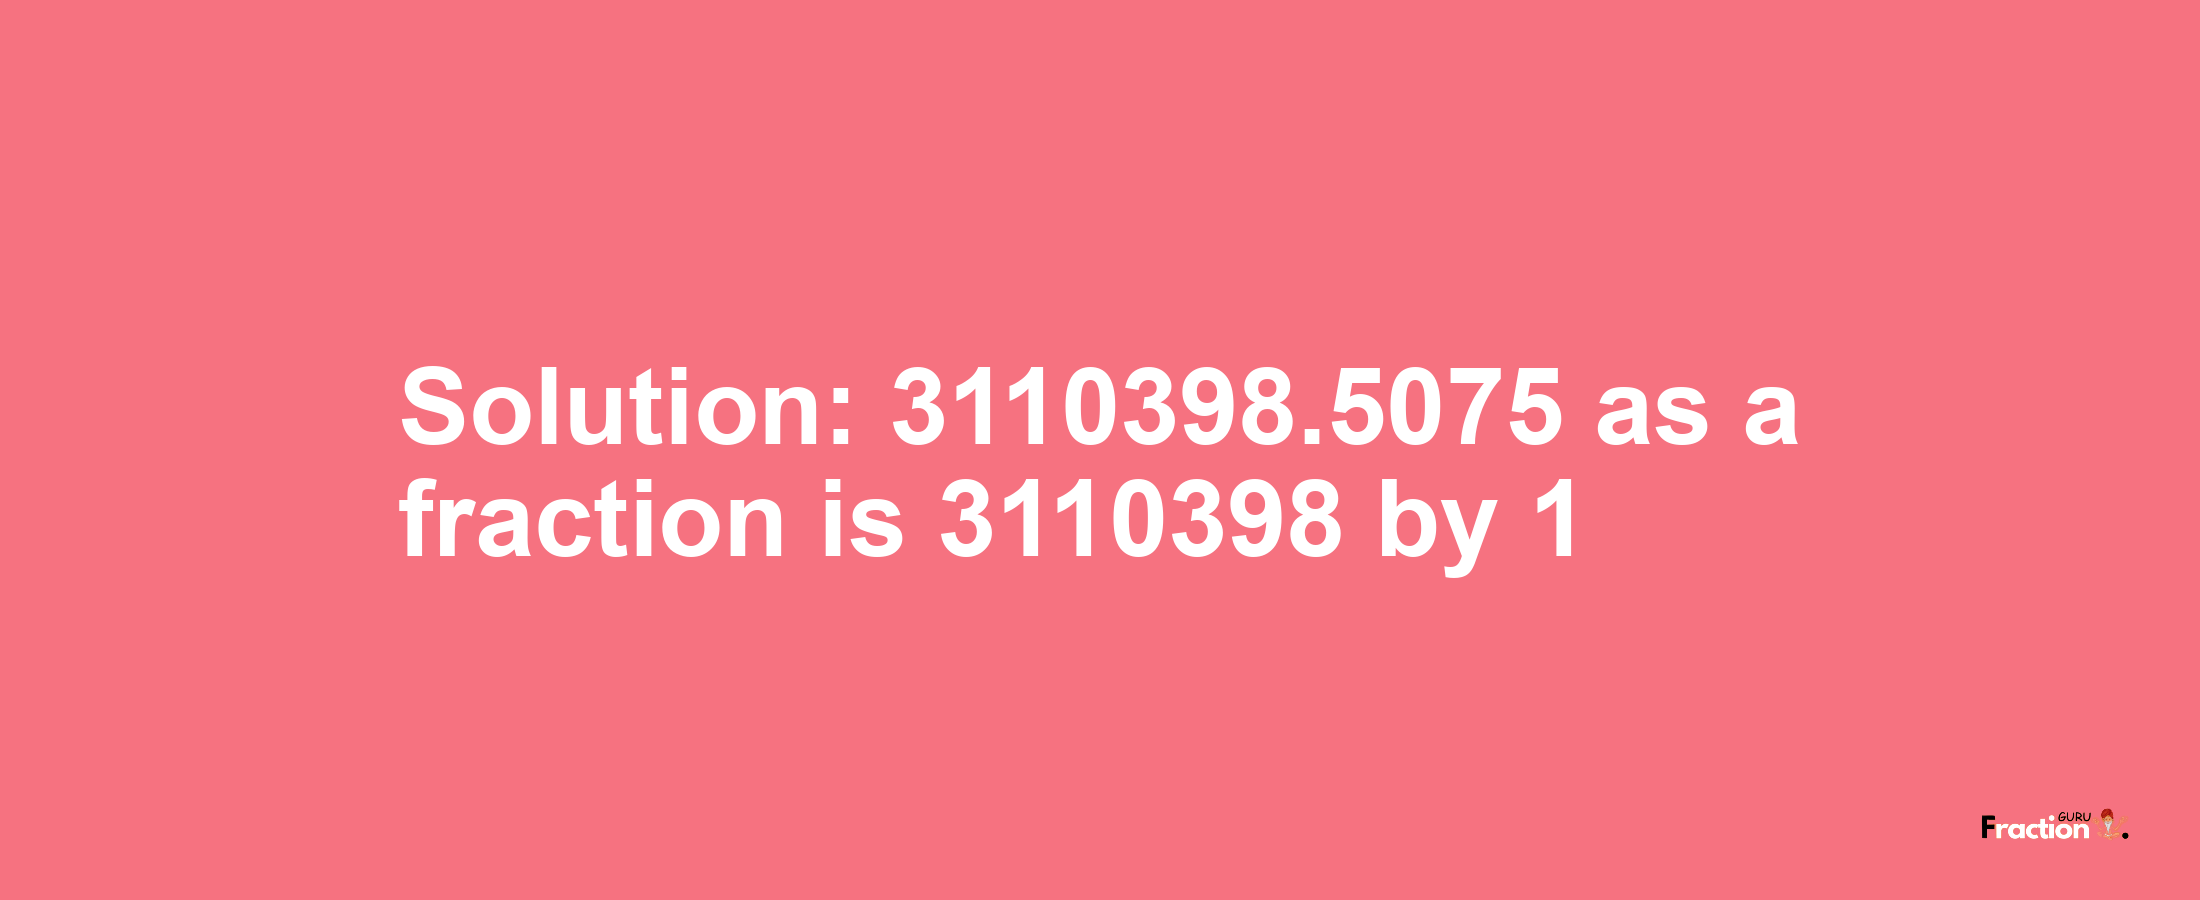 Solution:3110398.5075 as a fraction is 3110398/1